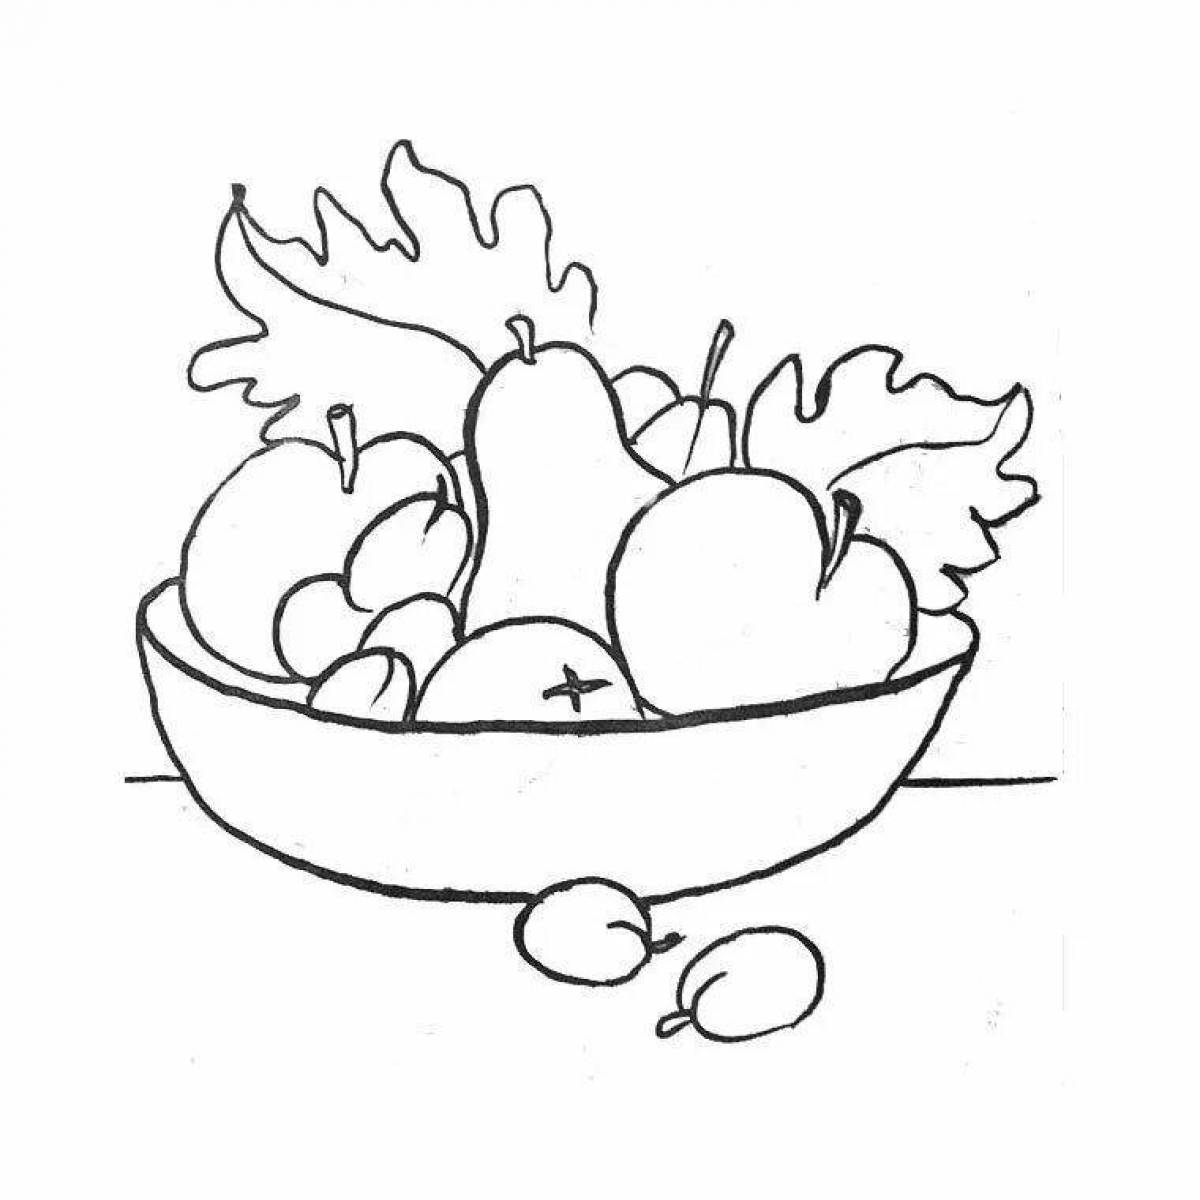 Coloring book irresistible fruit plate